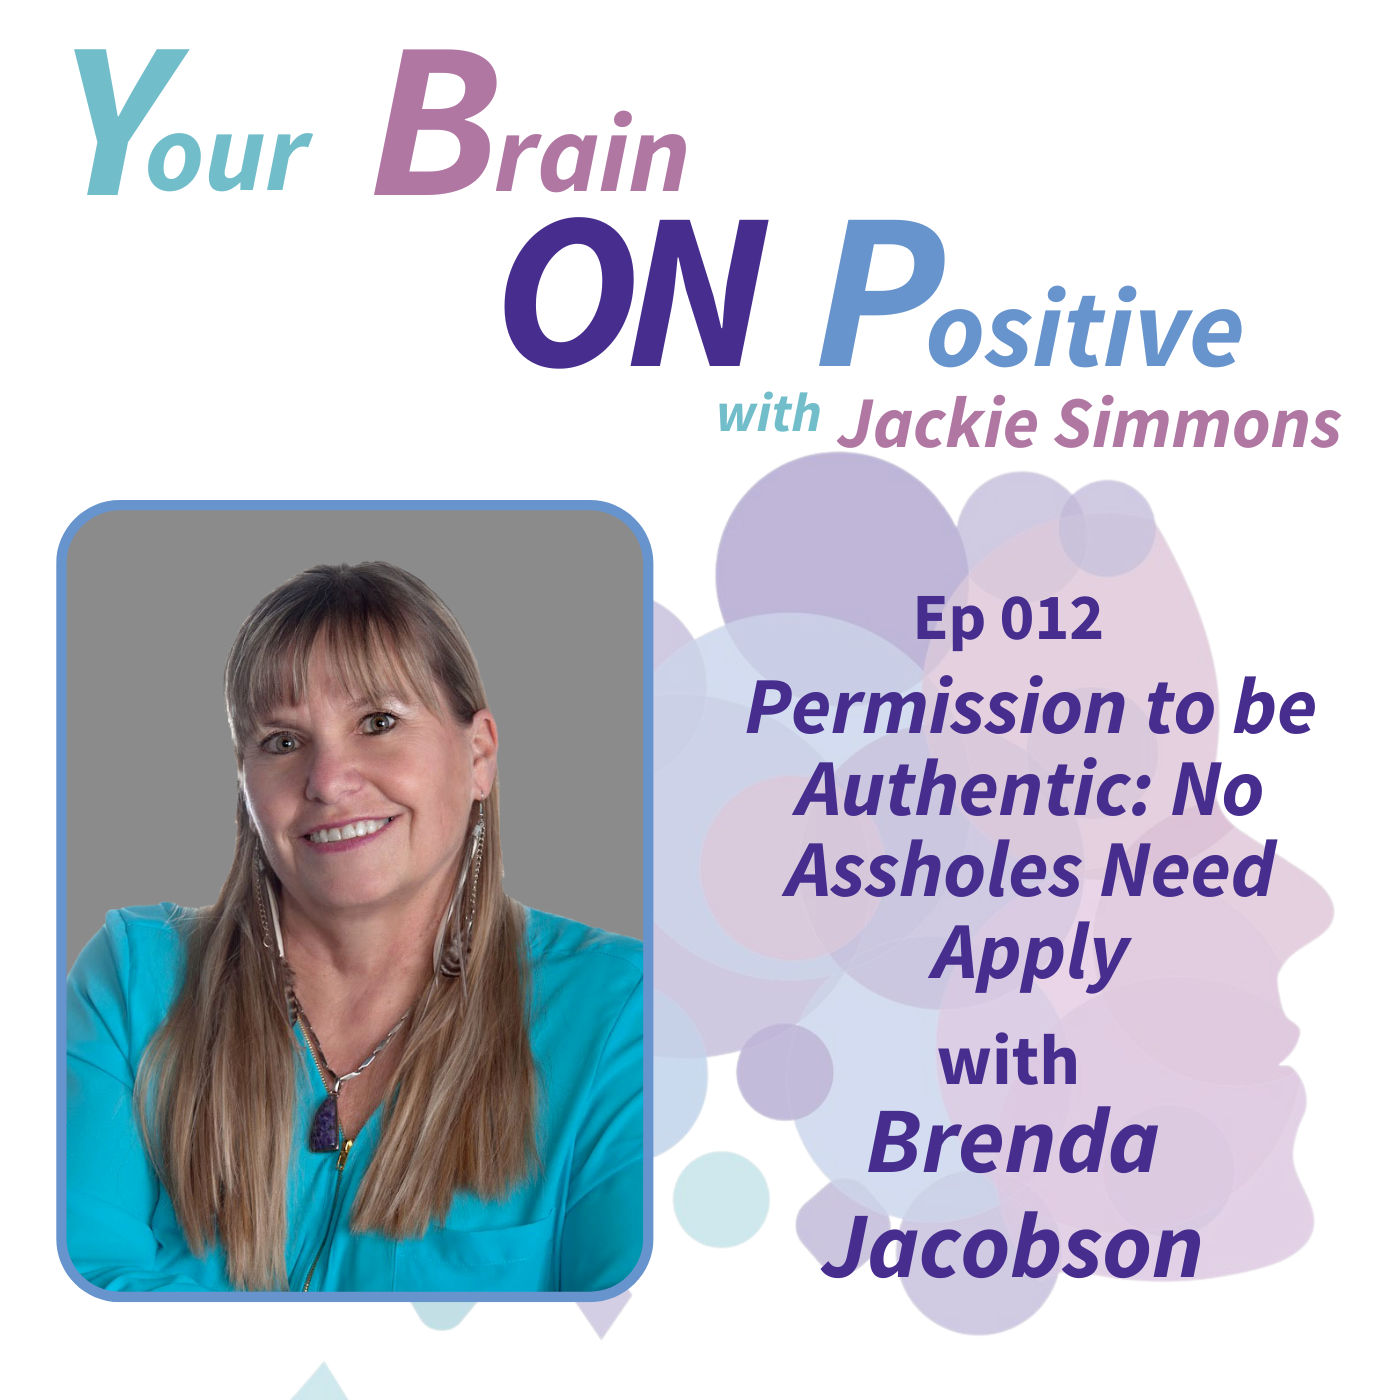 Permission to be Authentic: No Assholes Need Apply with Brenda Jacobson